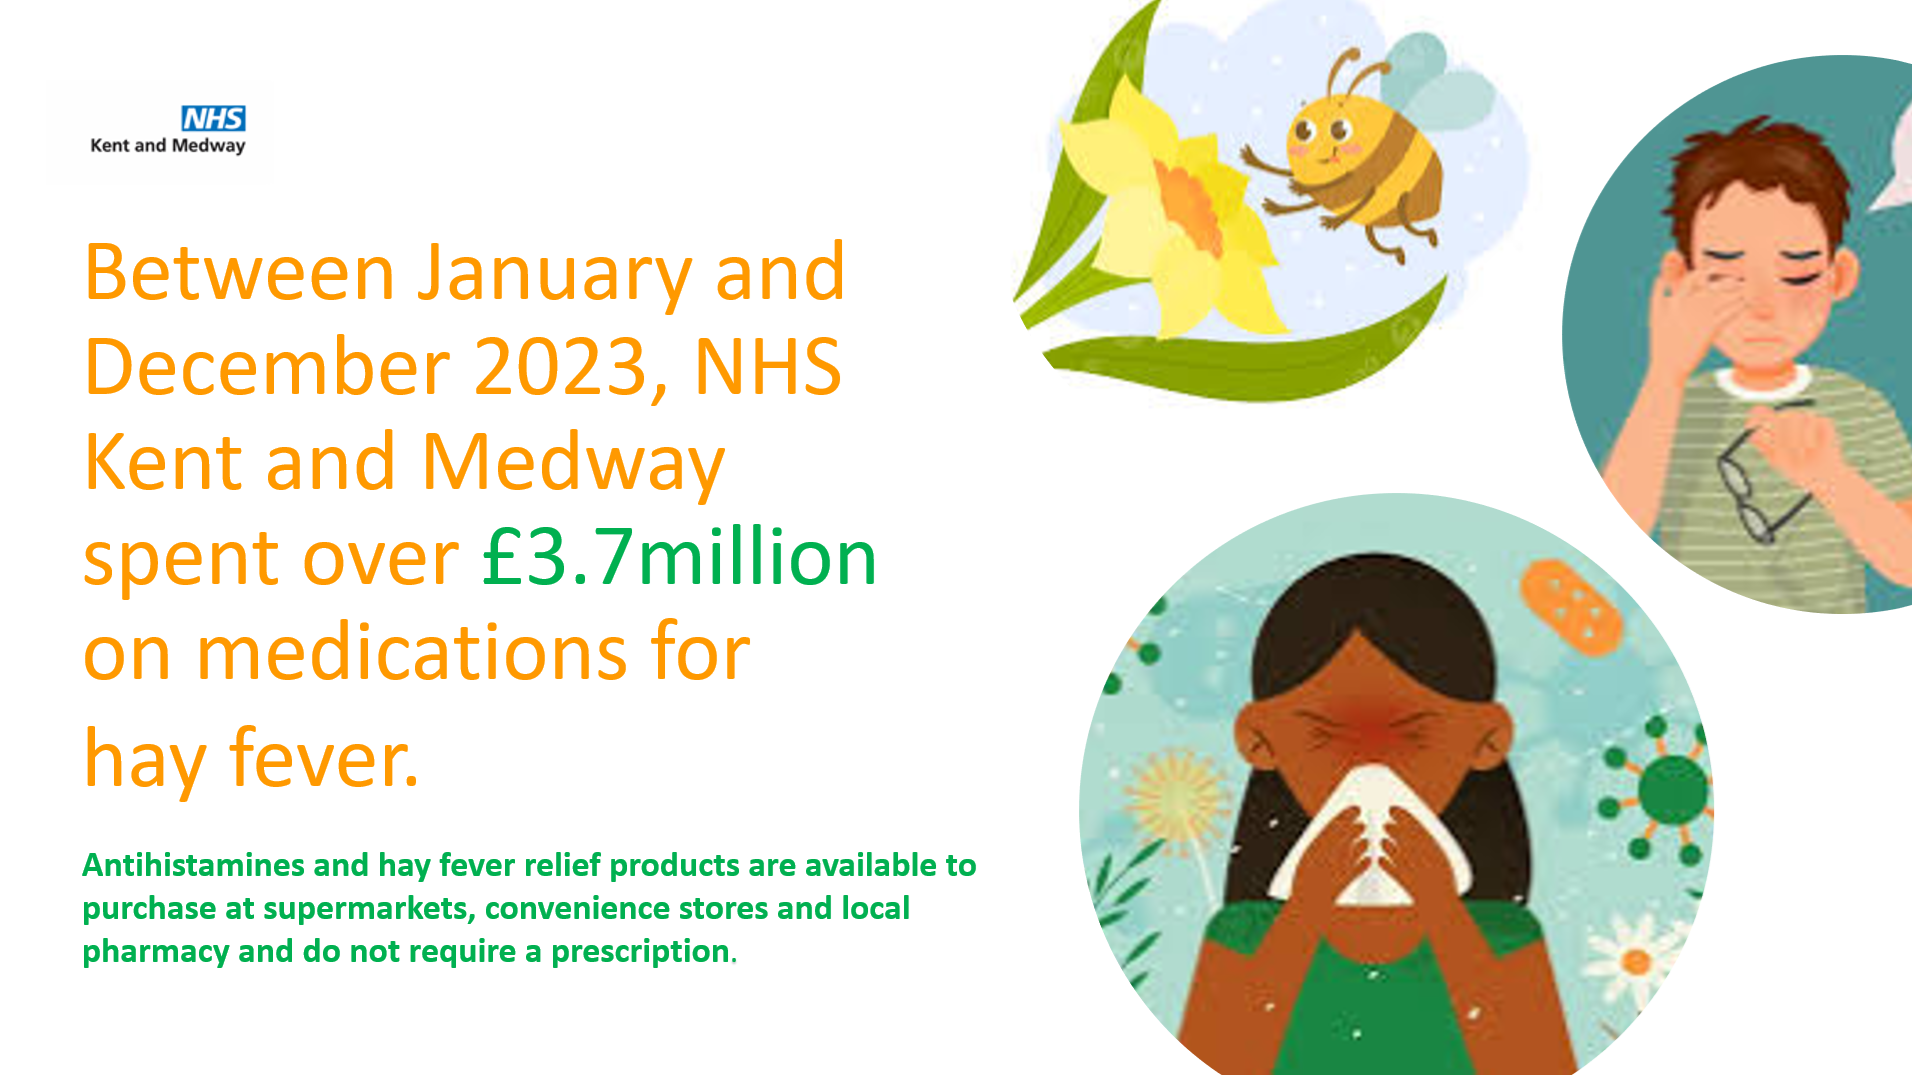 Poster that says 'Between January and December 2023, NHS Kent and Medway spent over £3.7million on medications for  hay fever. Antihistamines and hay fever relief products are available to purchase at supermarkets, convenience stores and local pharmacy and do not require a prescription.'